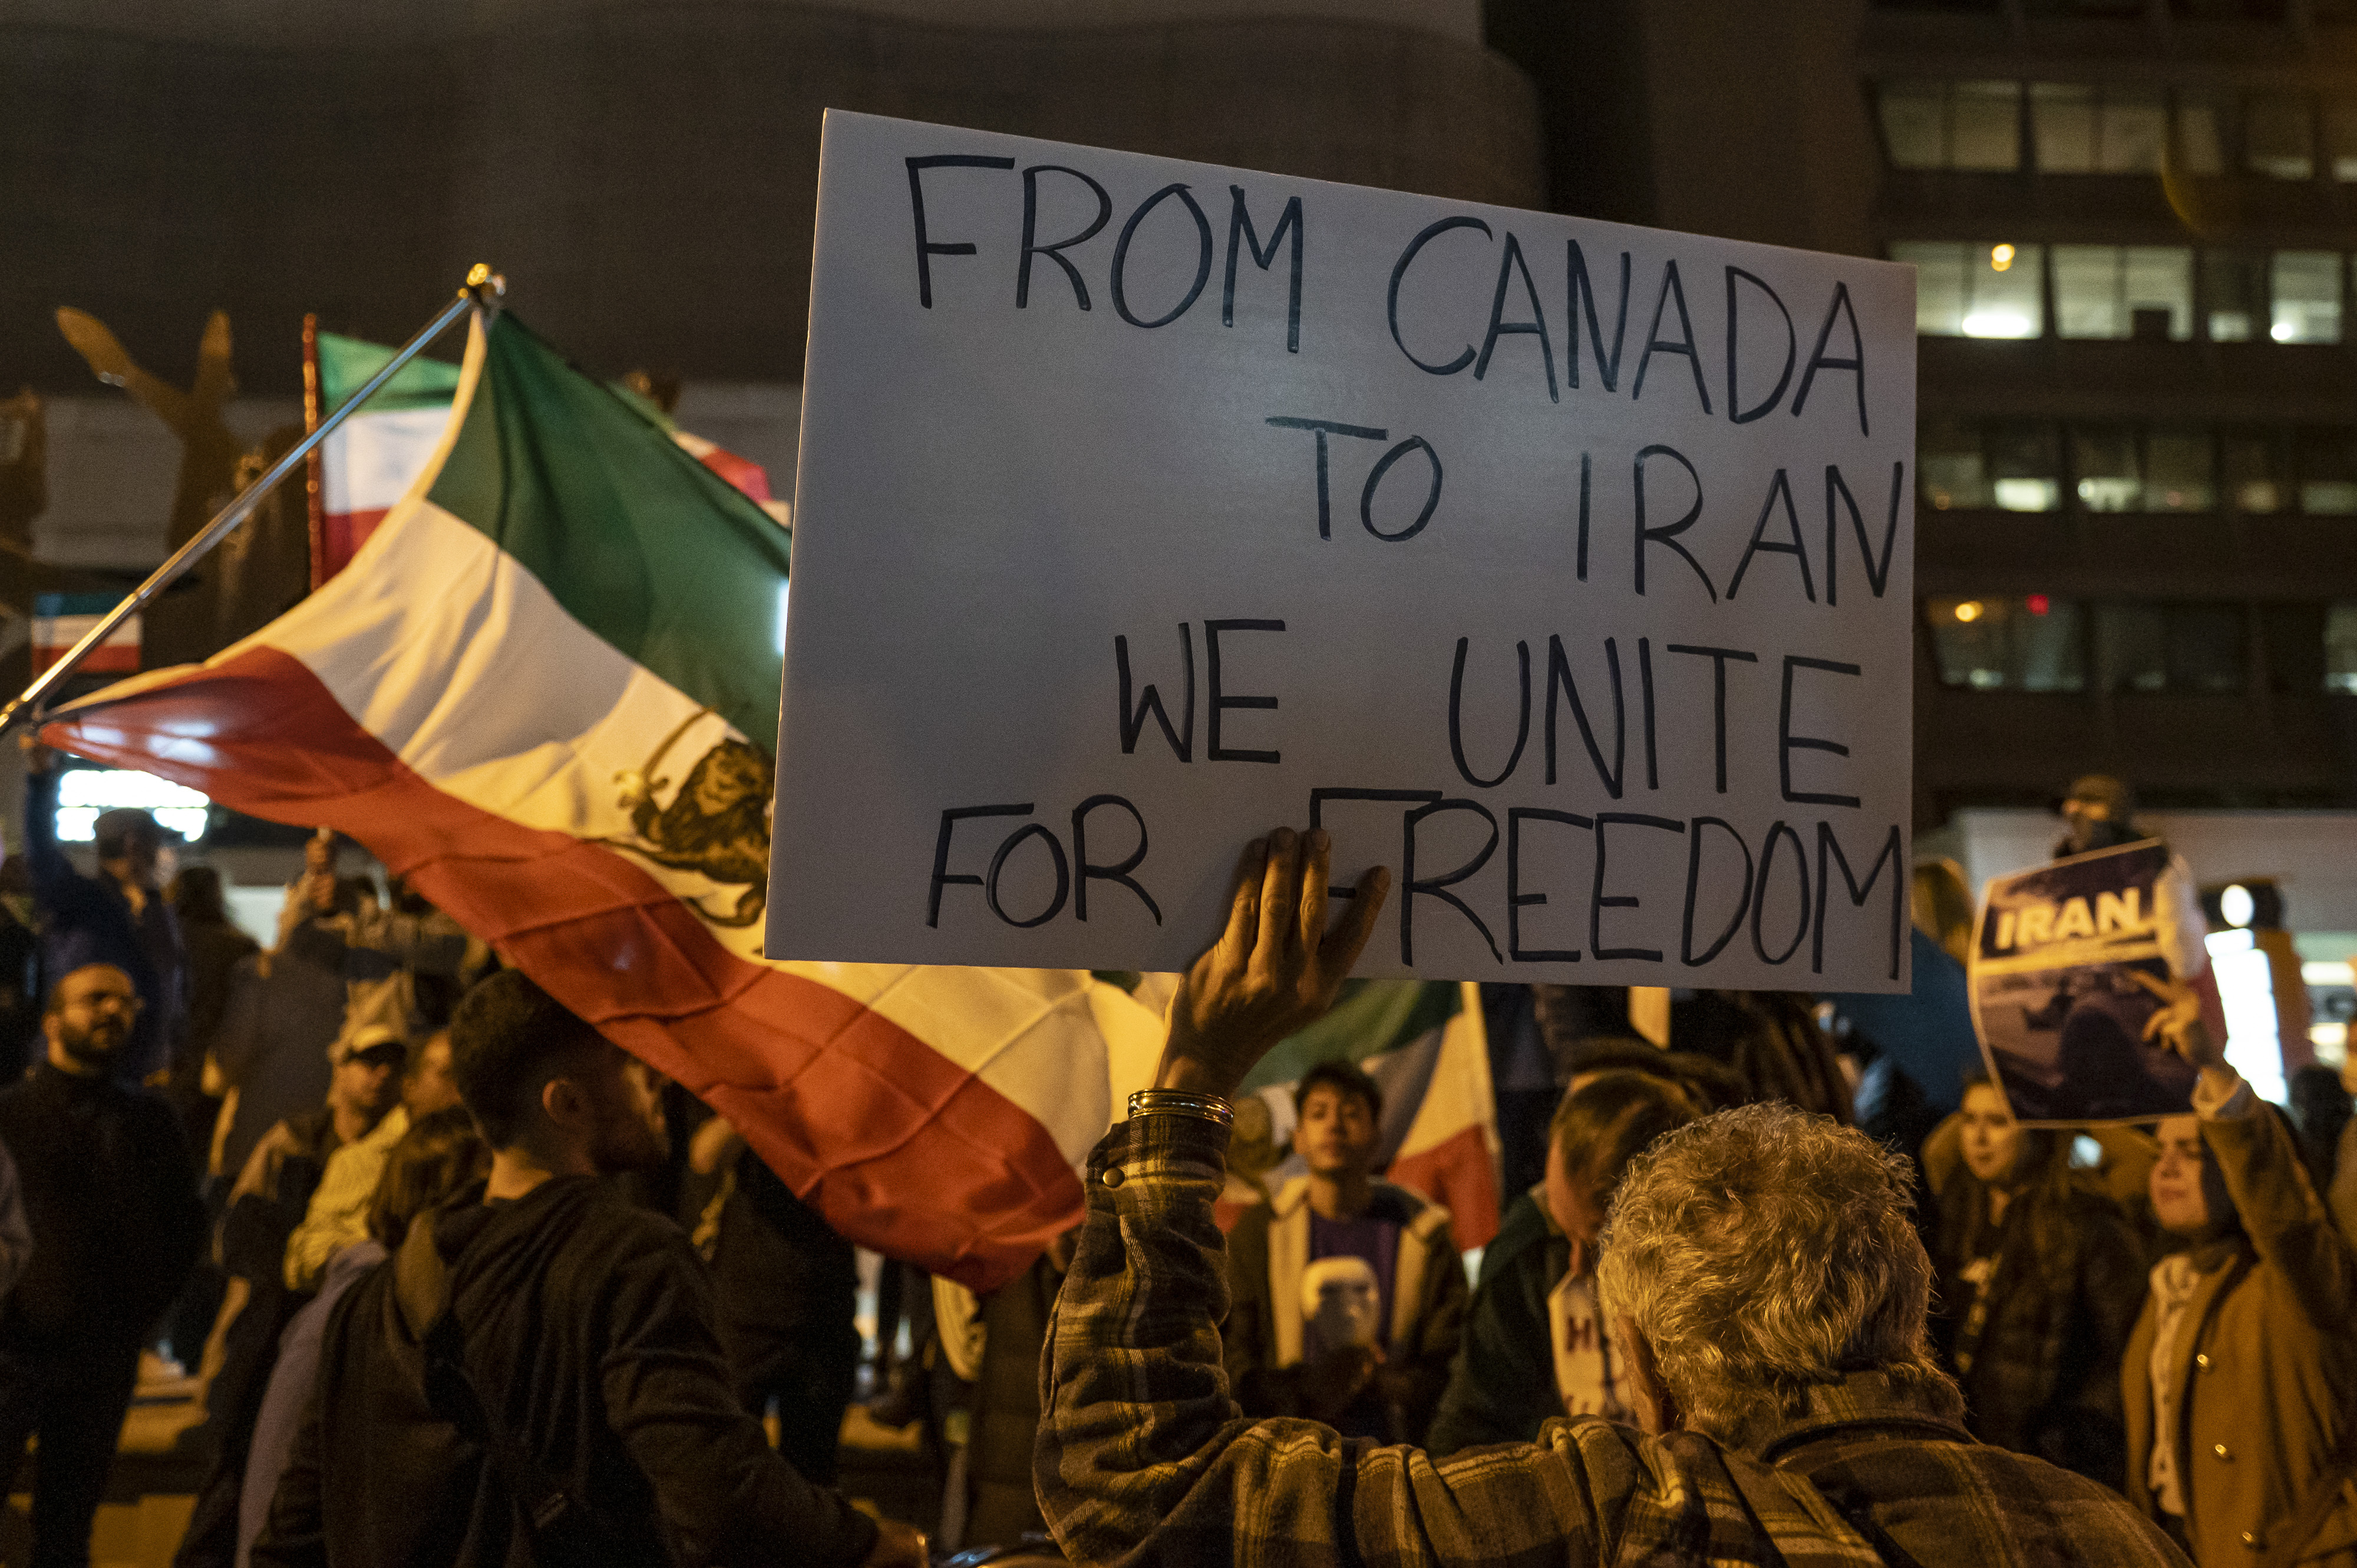 A group of people gather in protest at night in Toronto, some are holding Iranian flags and in the foreground, a man holds a sign that says "From Canada to Iran we unite for freedom" 